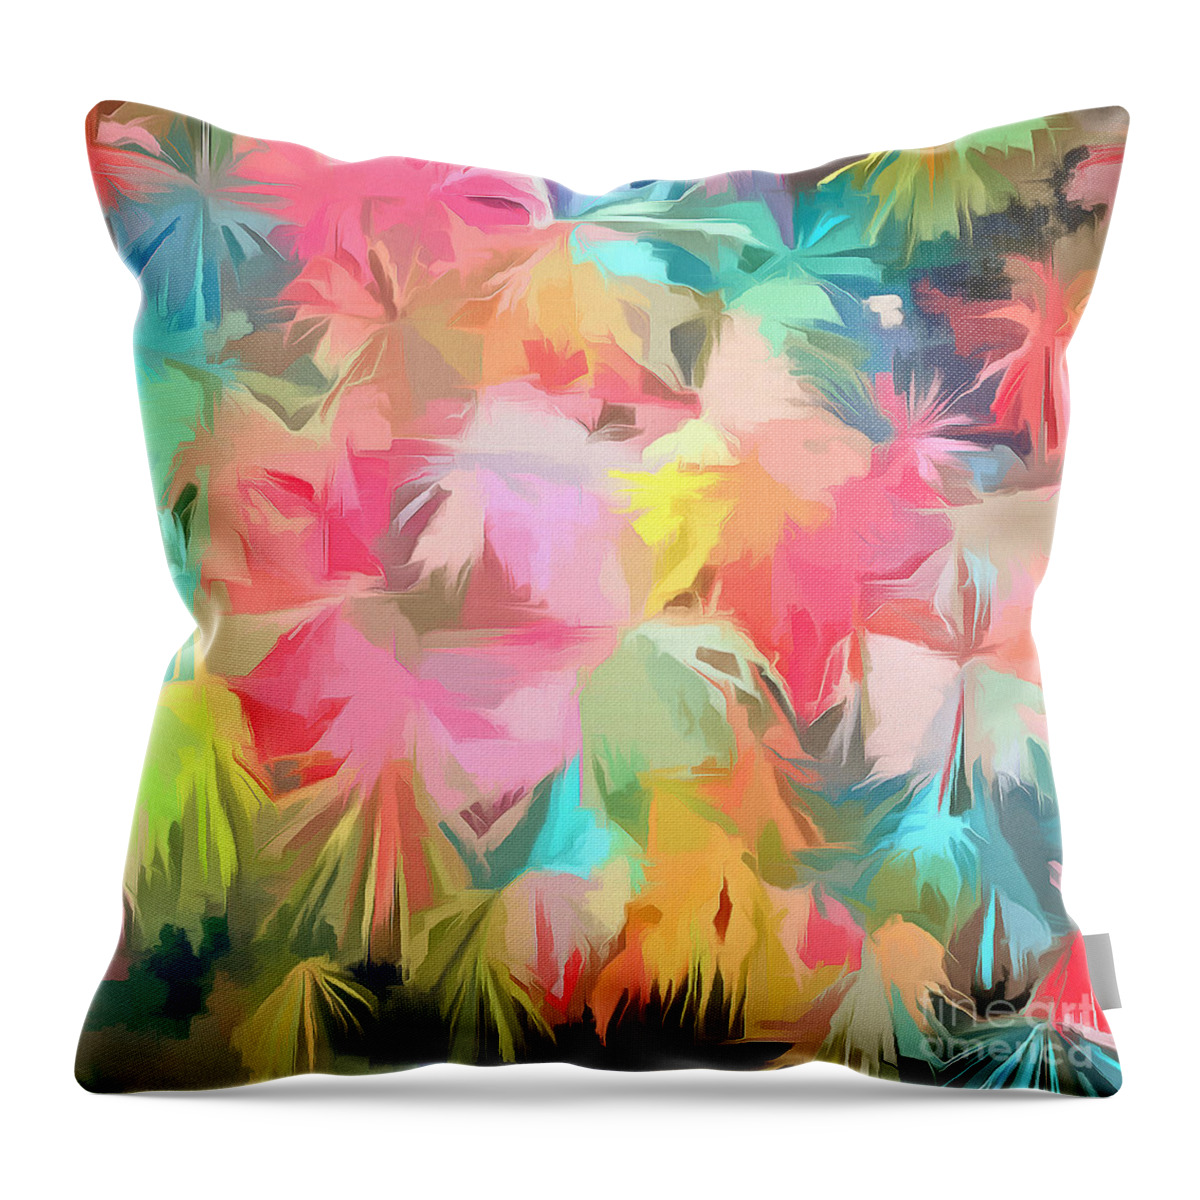 Painting Throw Pillow featuring the painting Fireworks Floral Abstract Square by Edward Fielding